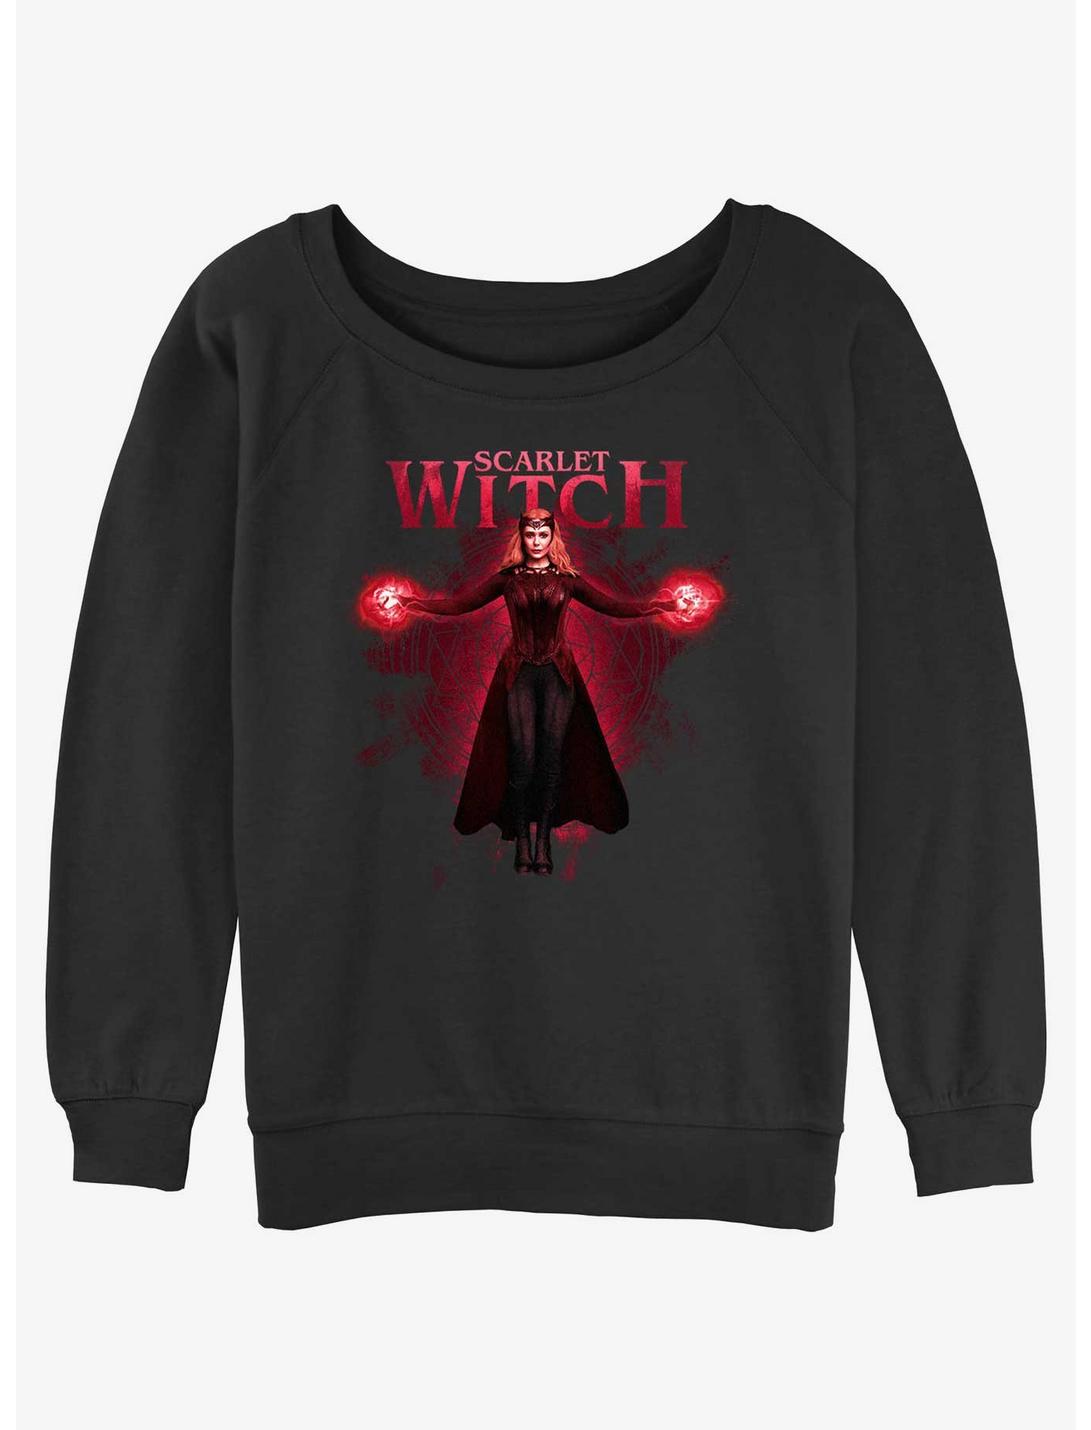 Marvel Doctor Strange in the Multiverse of Madness Scarlet Witch Rise Girls Slouchy Sweatshirt, BLACK, hi-res